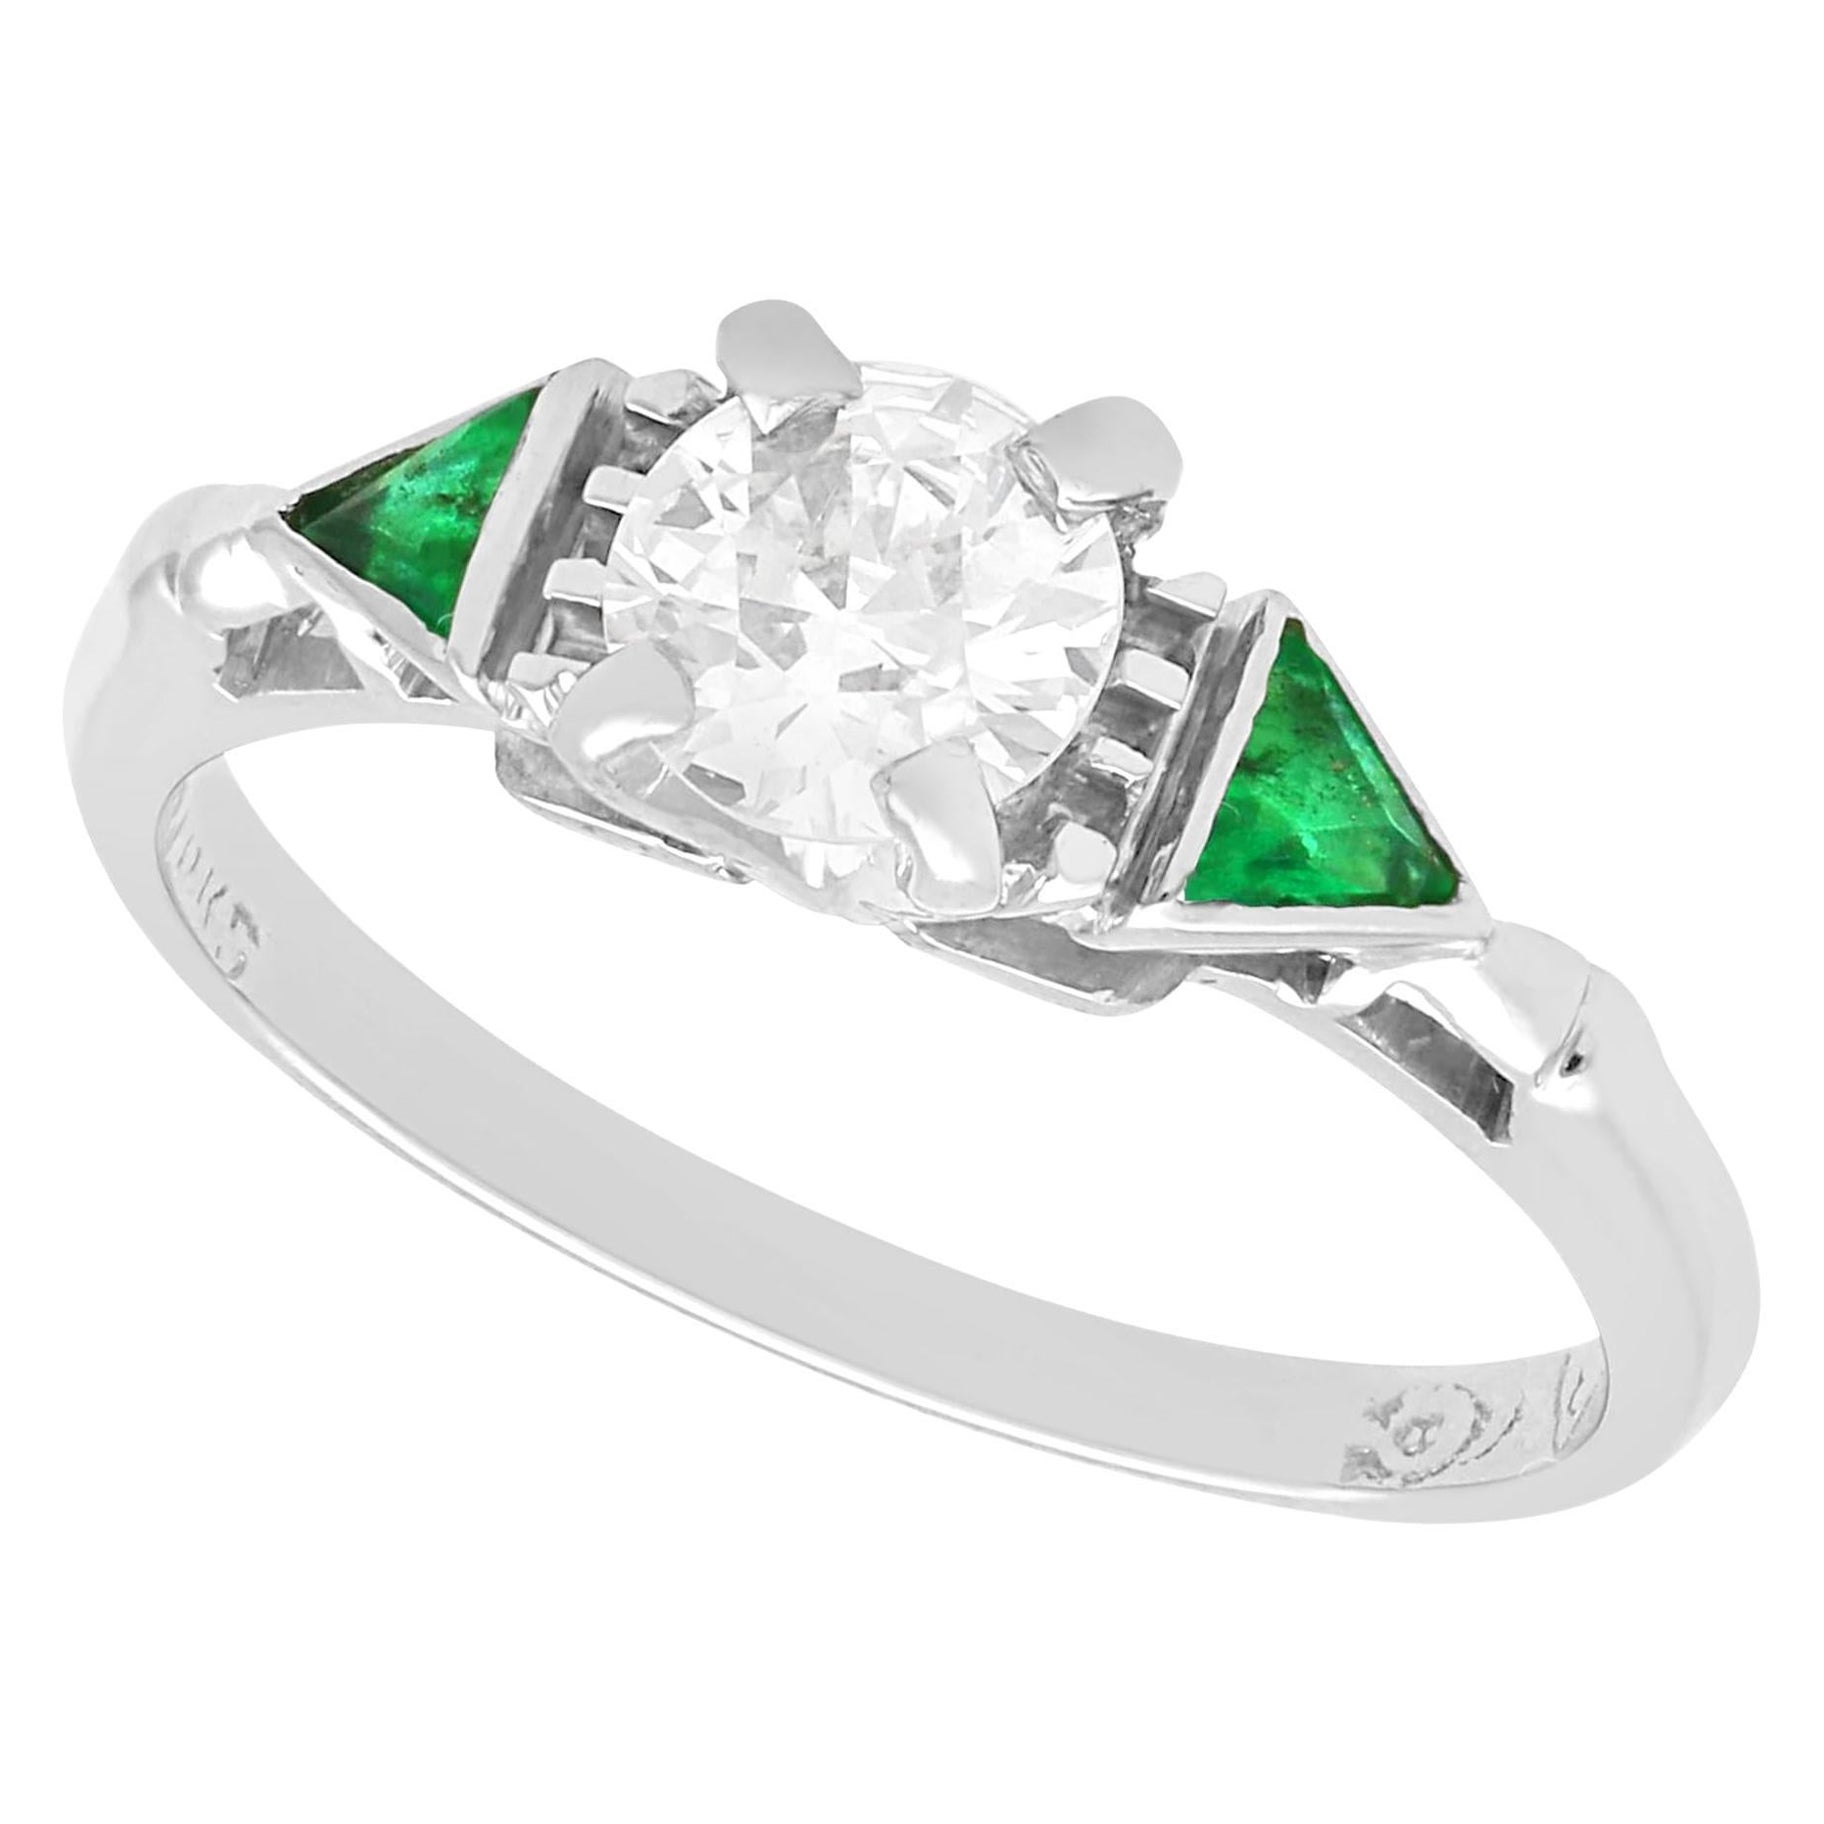 Vintage 0.55ct Diamond and 0.22ct Emerald 18k White Gold Trilogy Ring